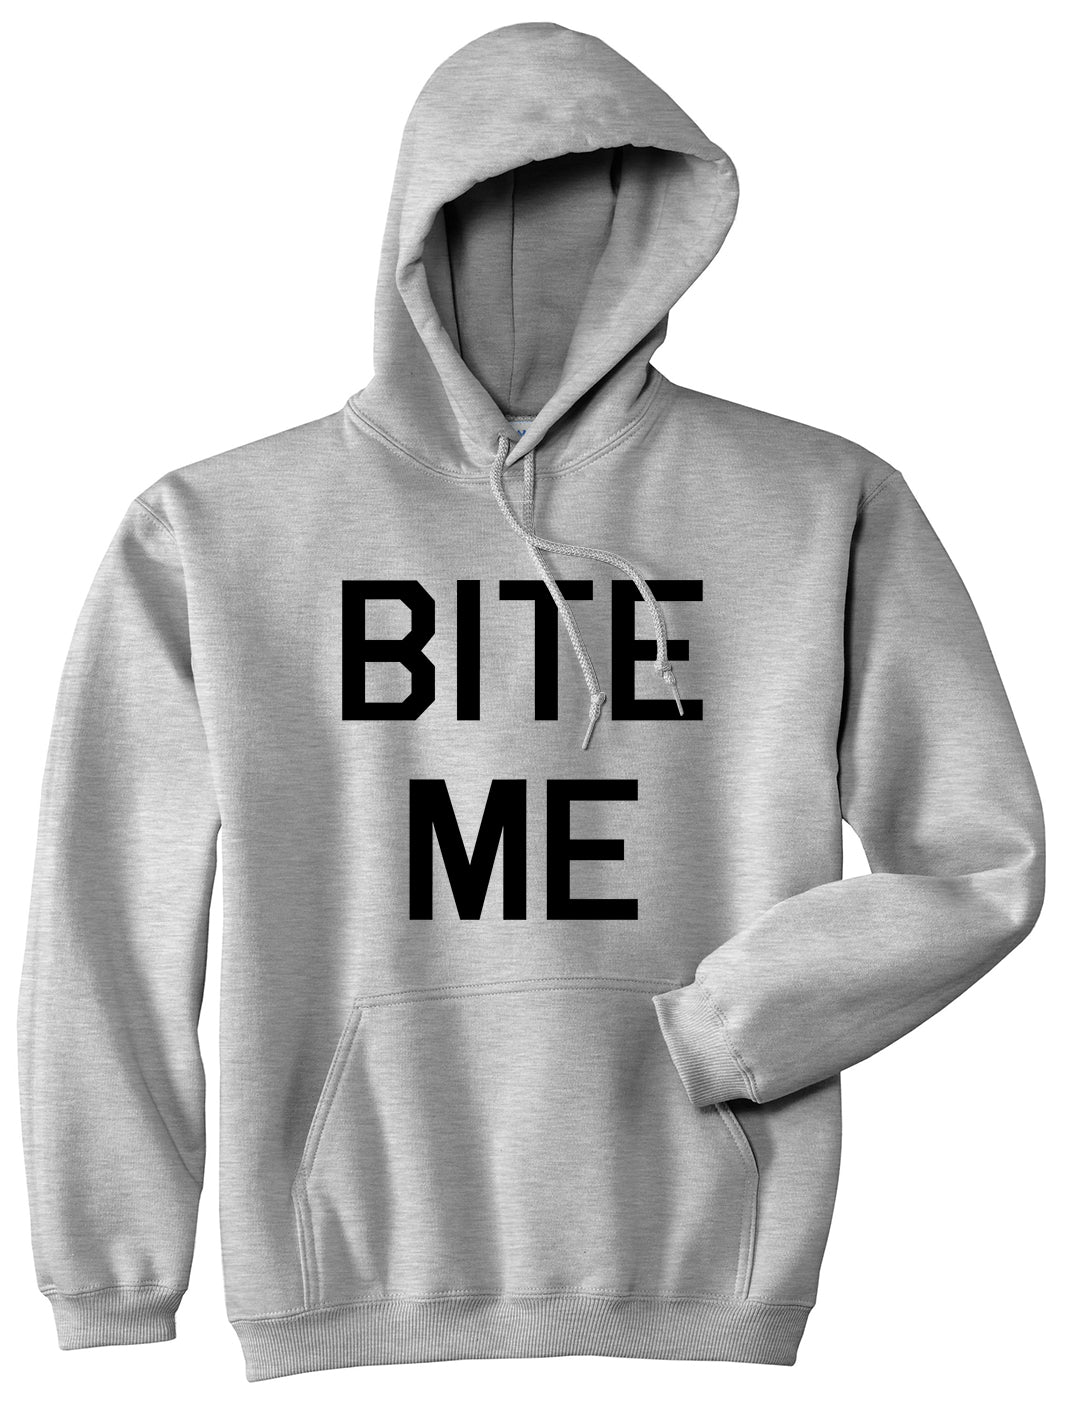 Bite Me Grey Pullover Hoodie by Kings Of NY